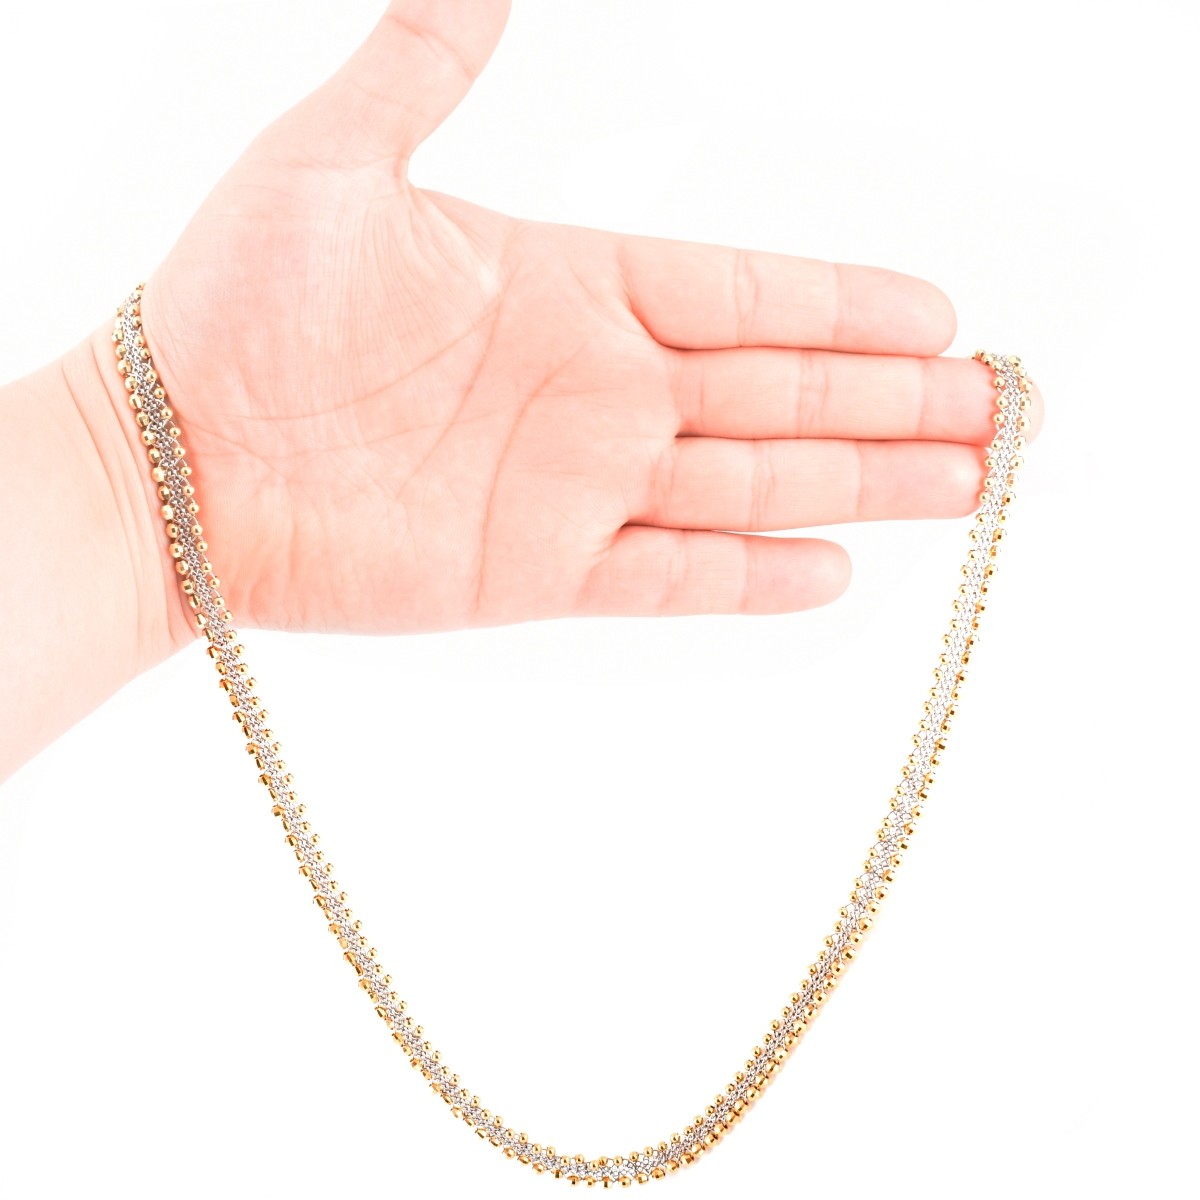 Vintage Platinum and 18K Gold Chain